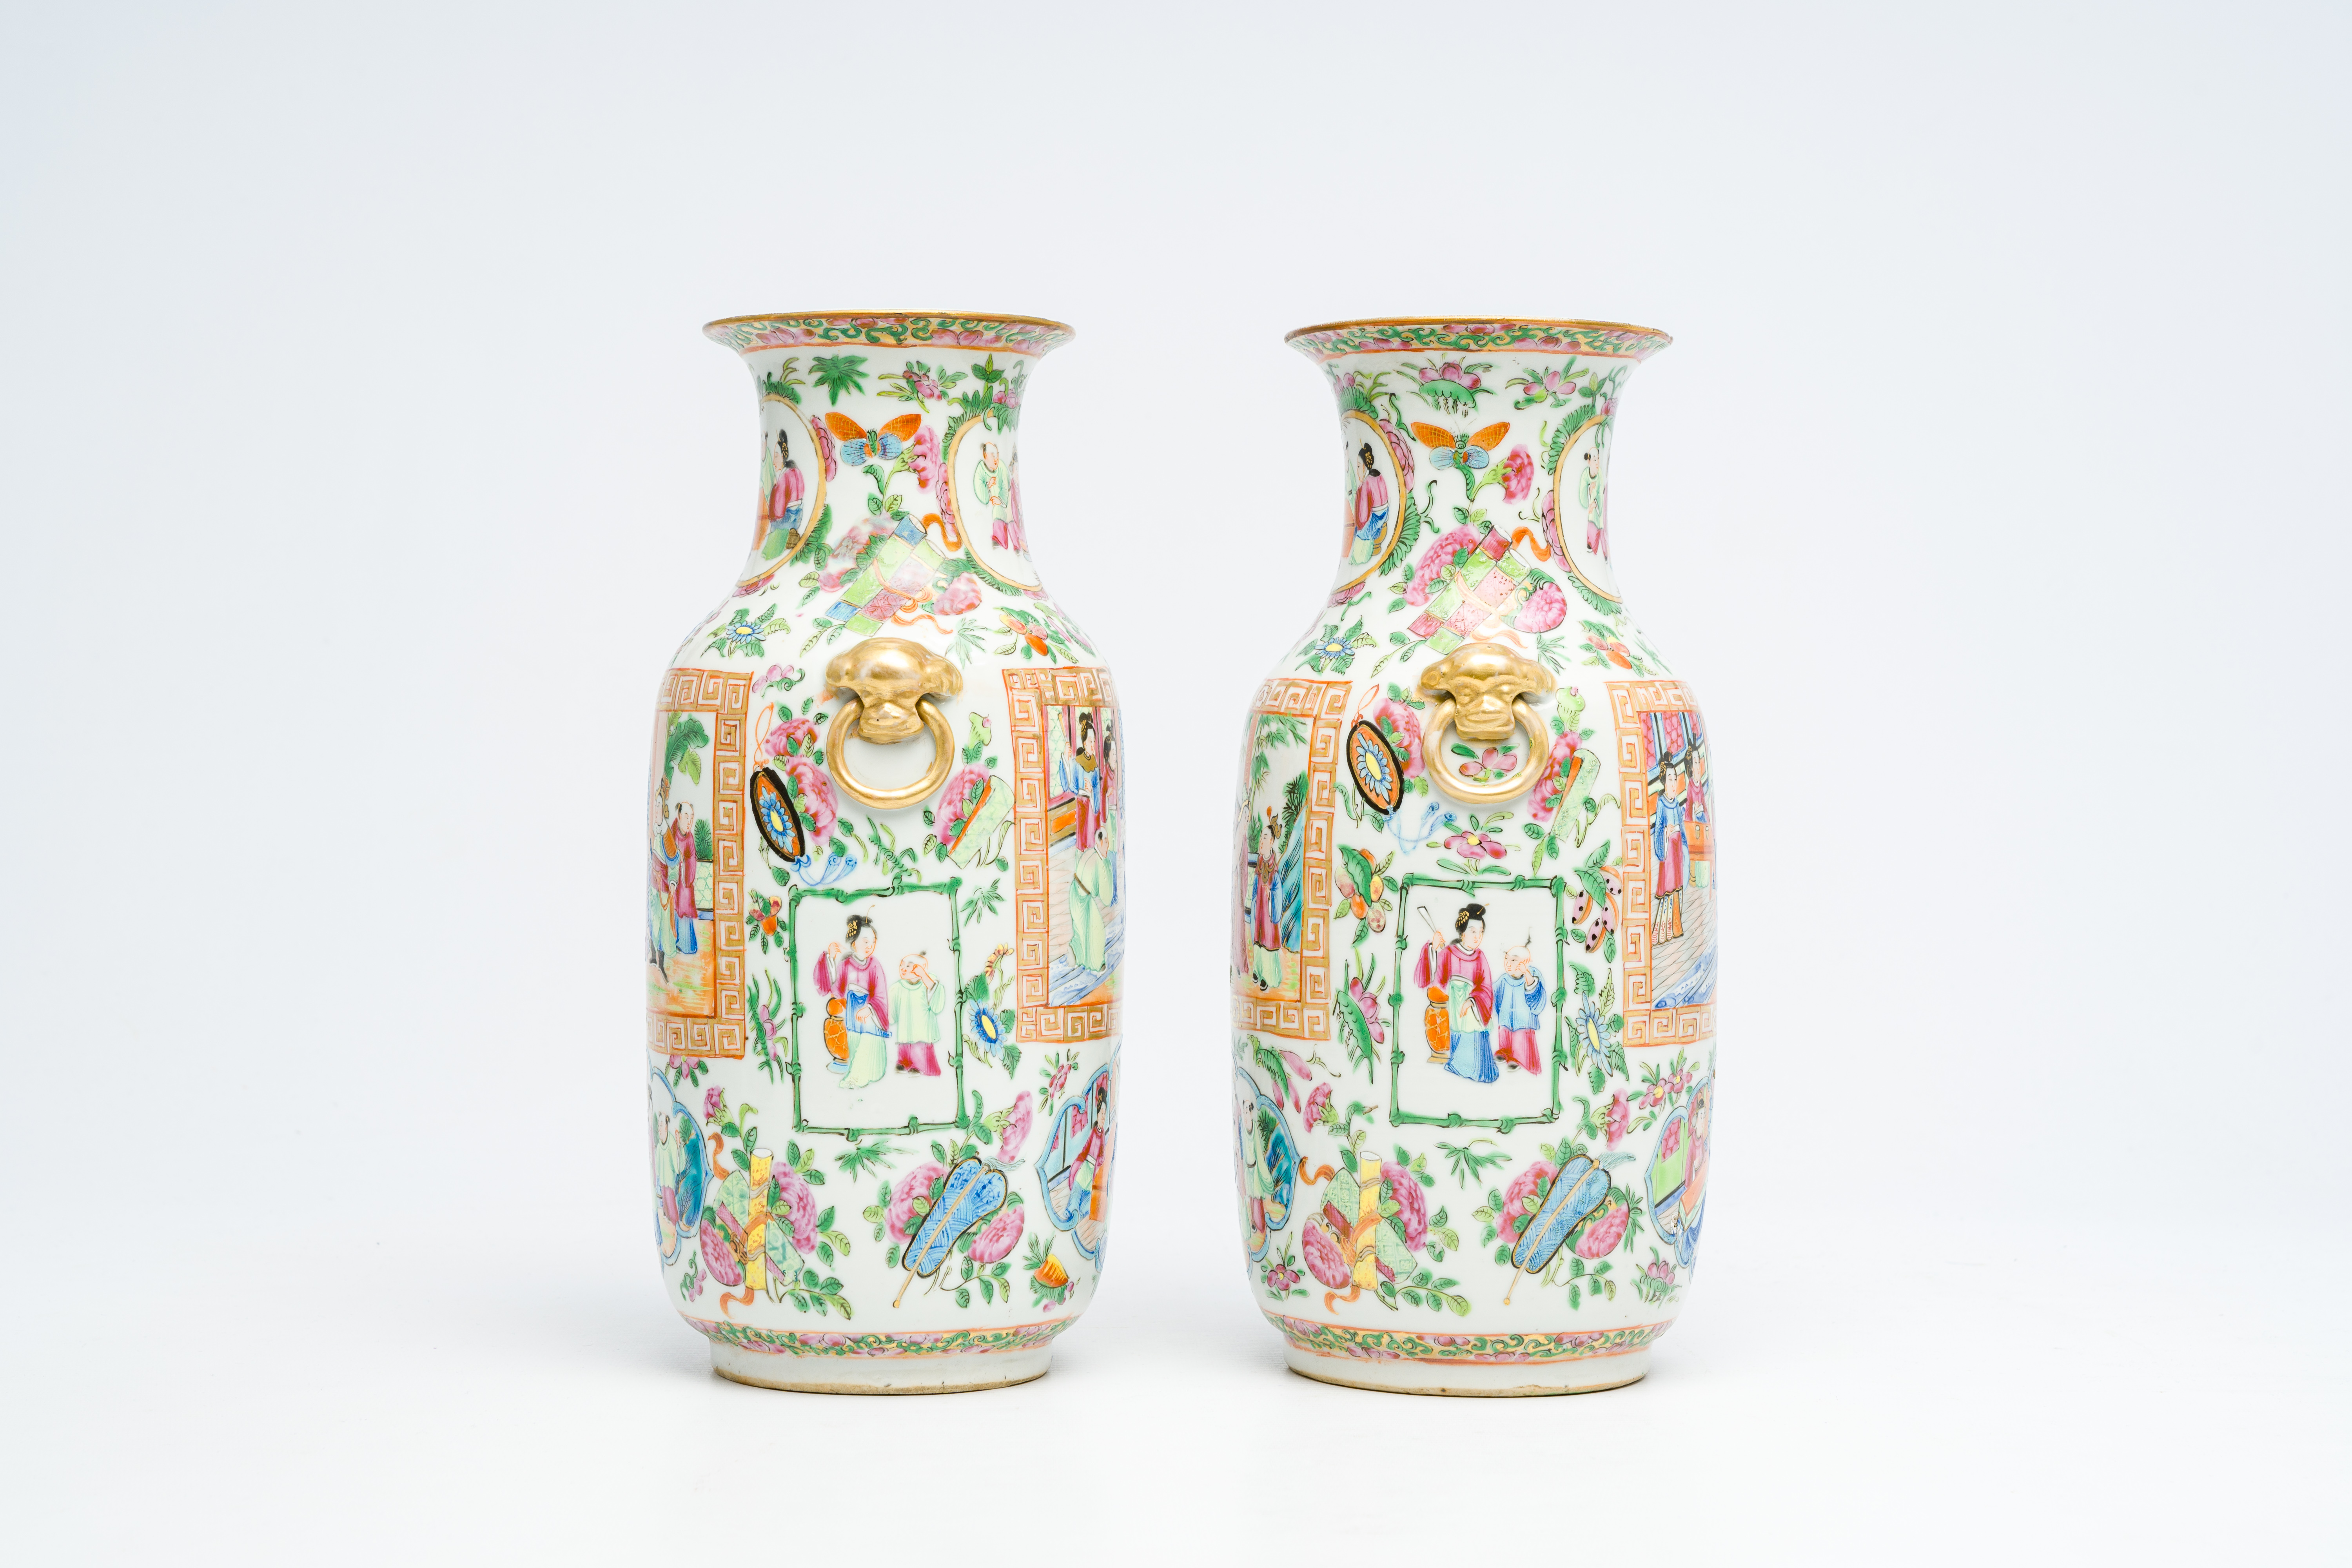 A pair of Chinese Canton famille rose vases with palace scenes and floral design, 19th C. - Image 2 of 6